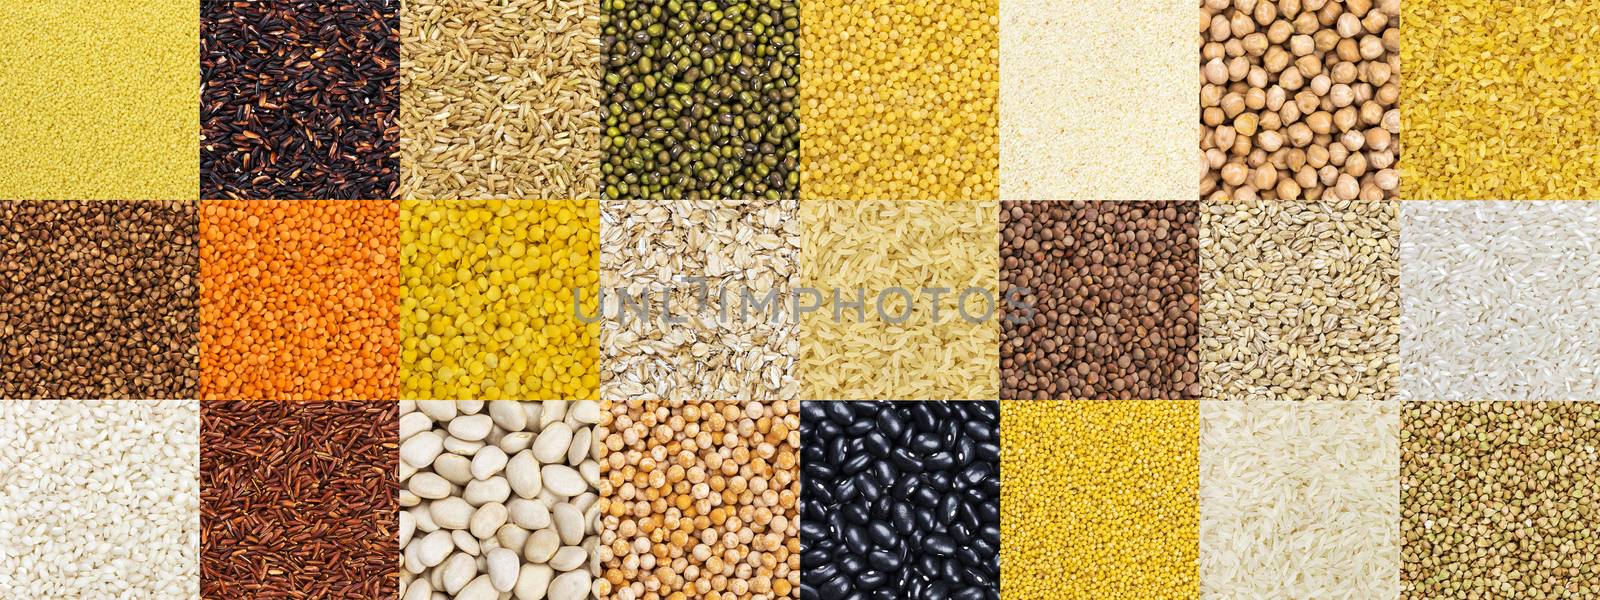 Collection of different cereals, grains, rice and beans backgrounds. by xamtiw